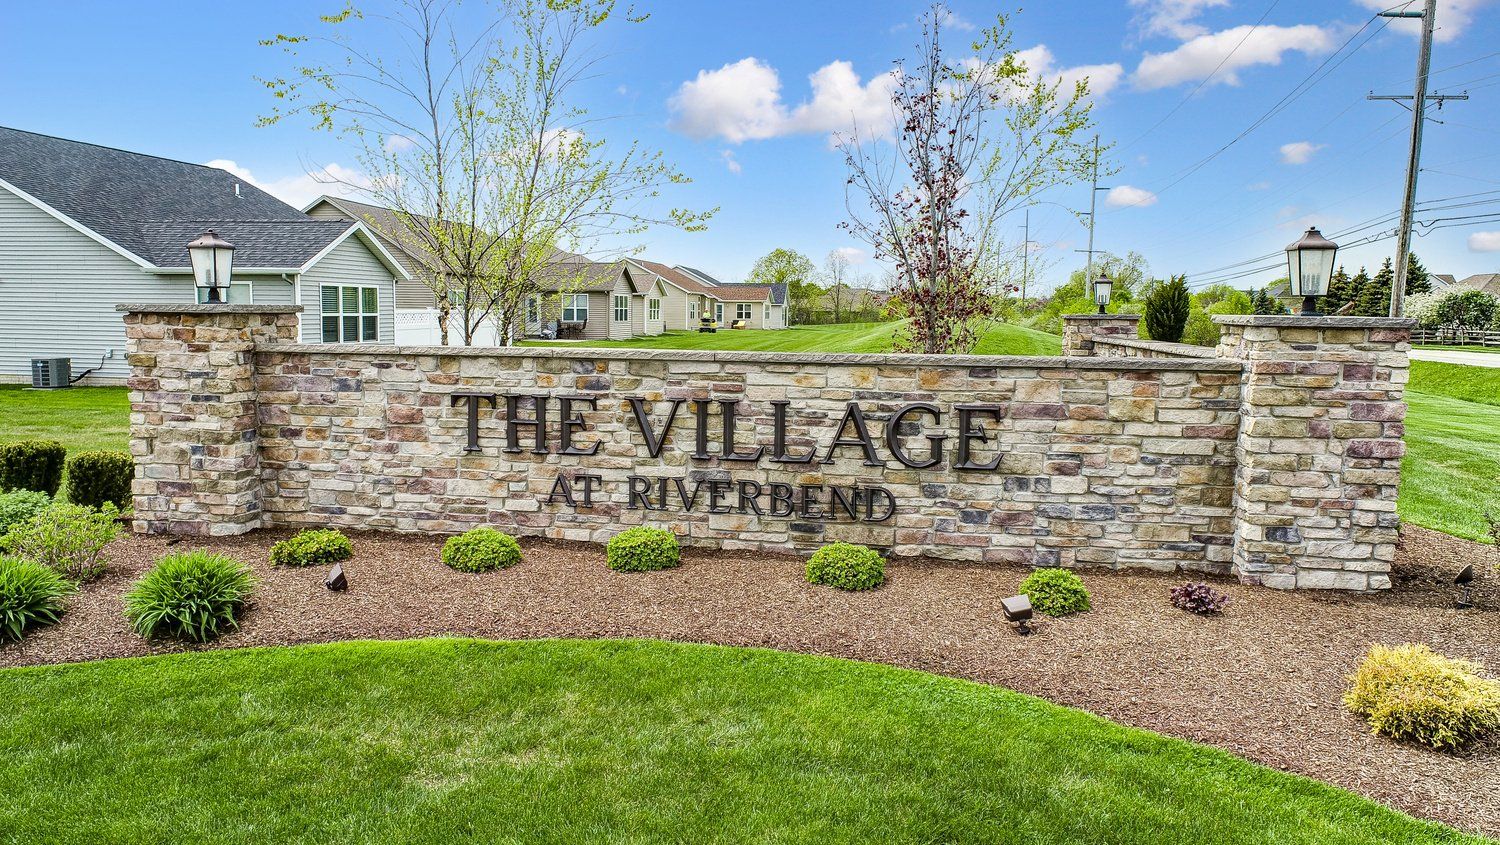 The Village at Riverbend - McCarthy Builders, Perrysburg & Waterville, Ohio